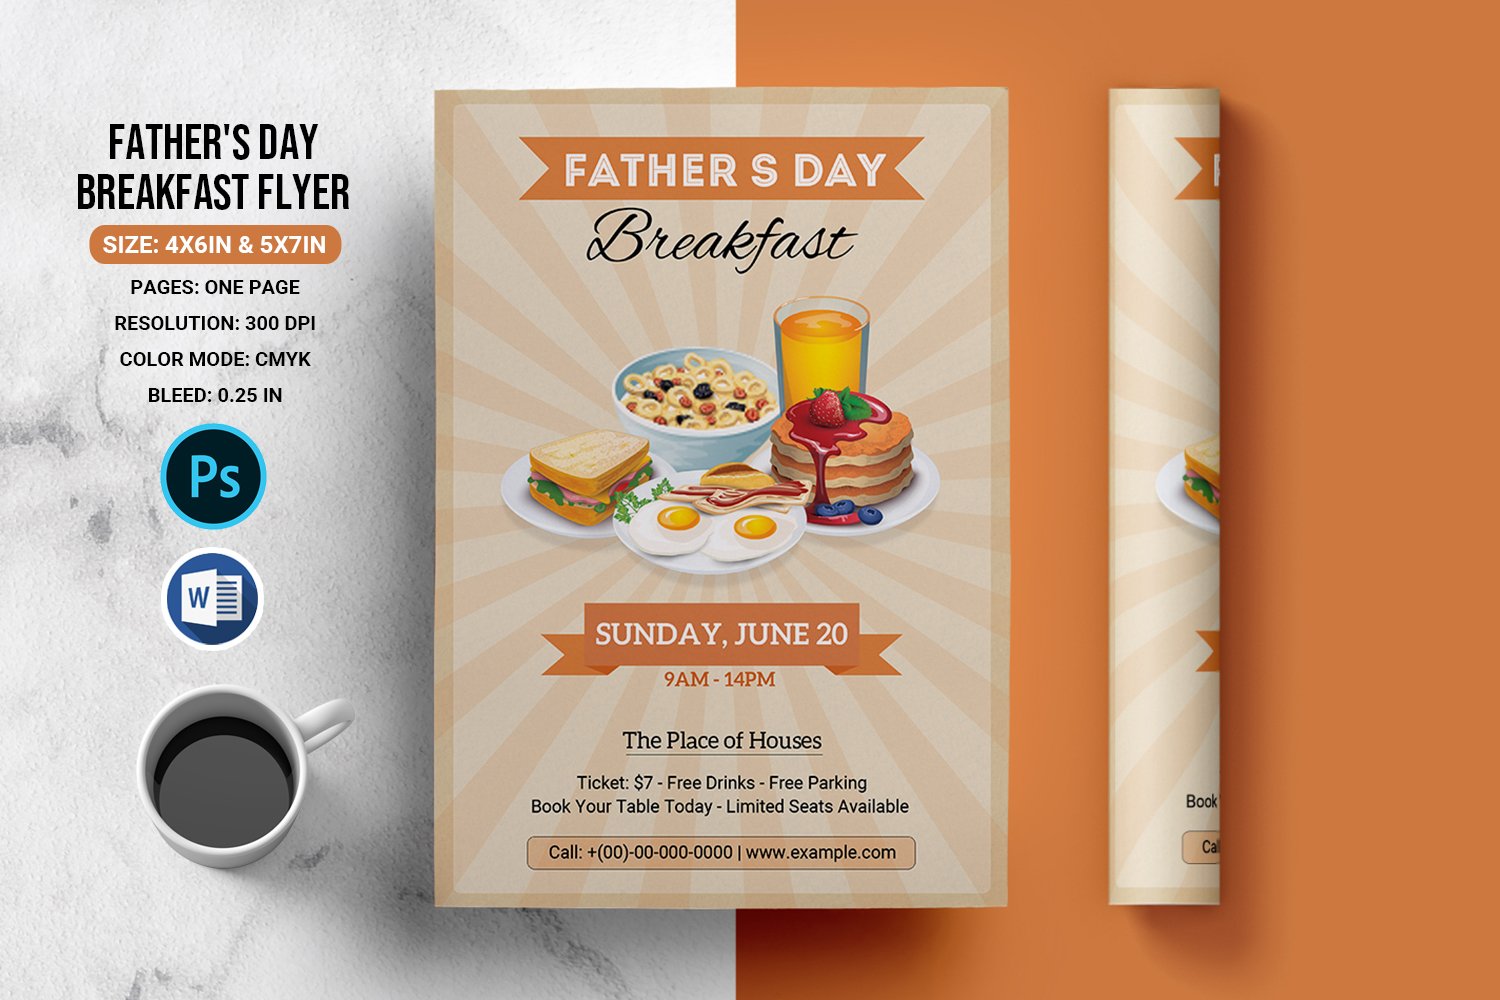 Father's Day Breakfast Flyer V01 cover image.